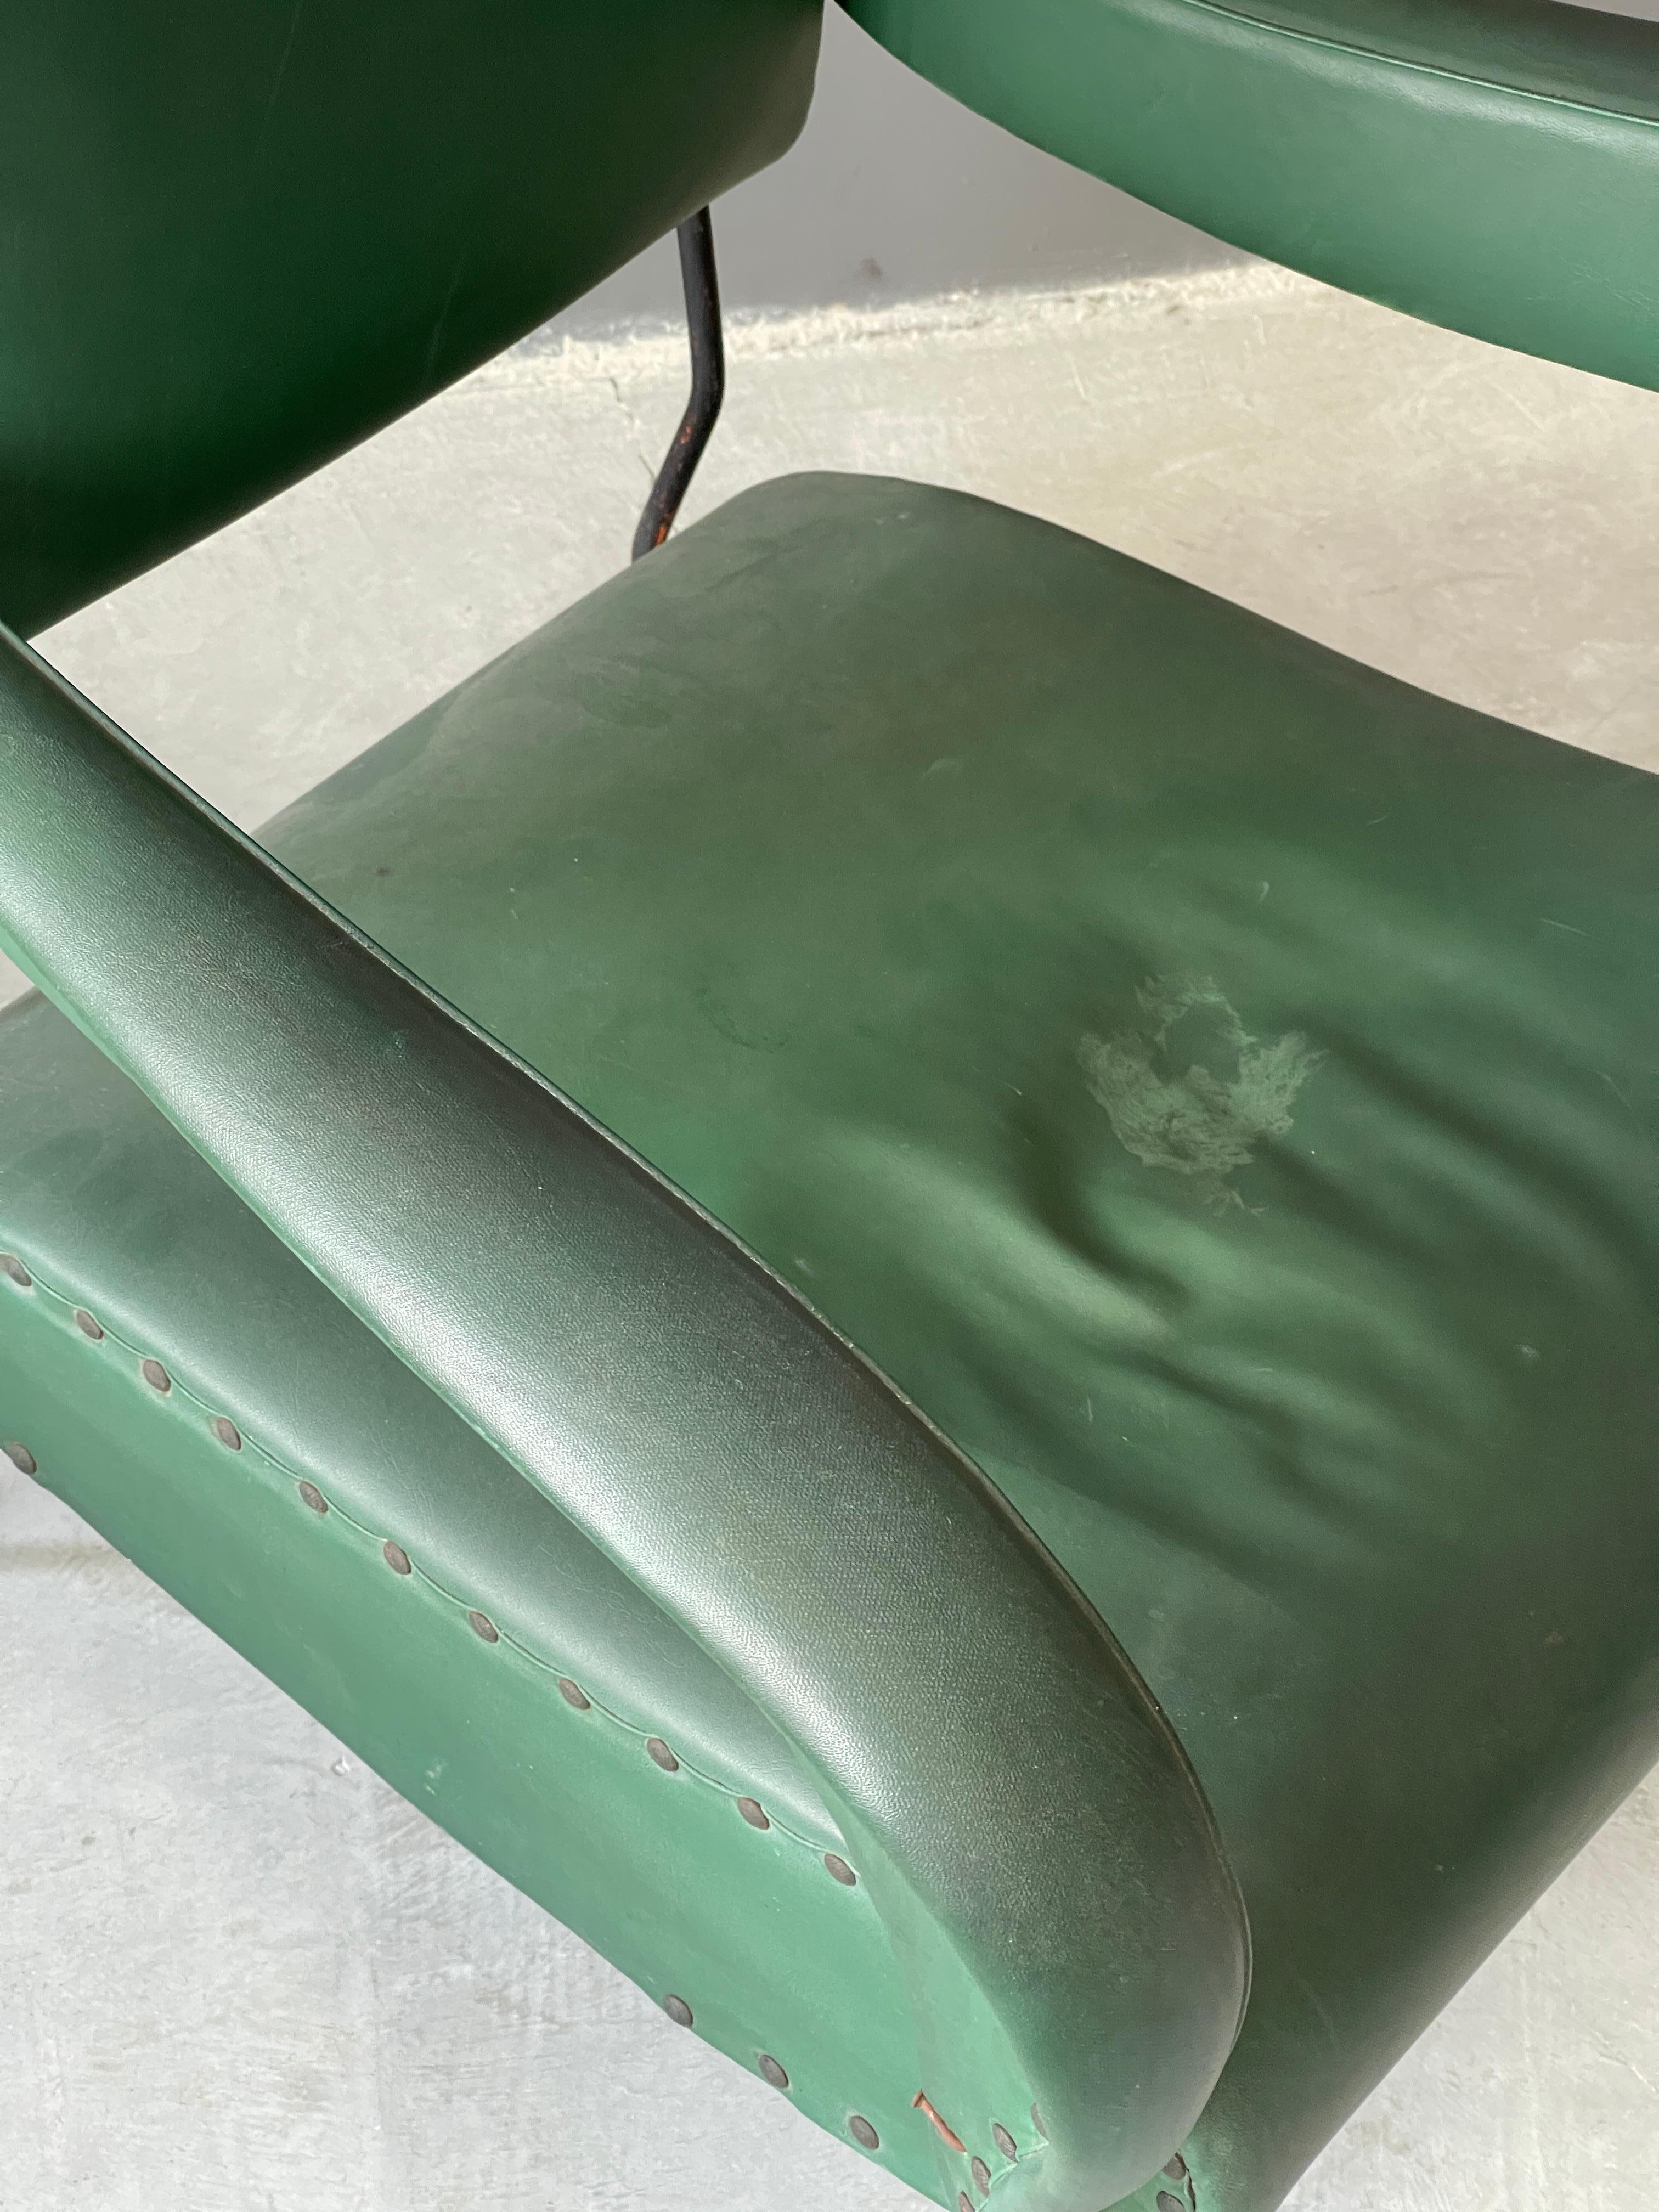 Italian Designer, Lounge Chairs, Lacquered Metal, Green-Dyed Vinyl, Italy, 1950s In Fair Condition For Sale In High Point, NC